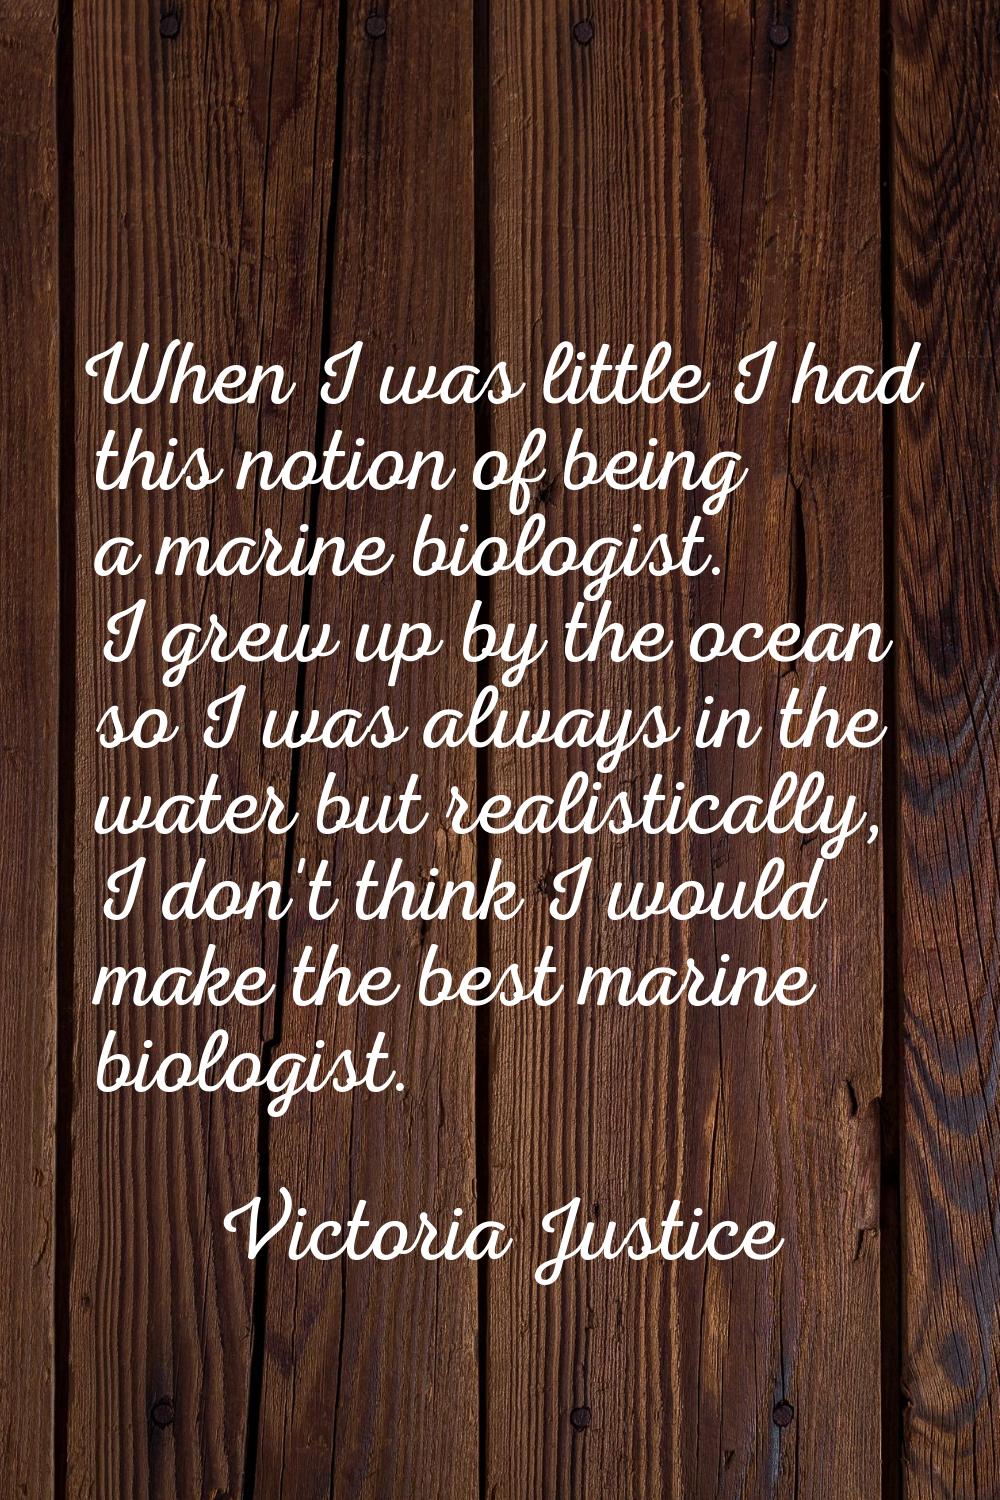 When I was little I had this notion of being a marine biologist. I grew up by the ocean so I was al